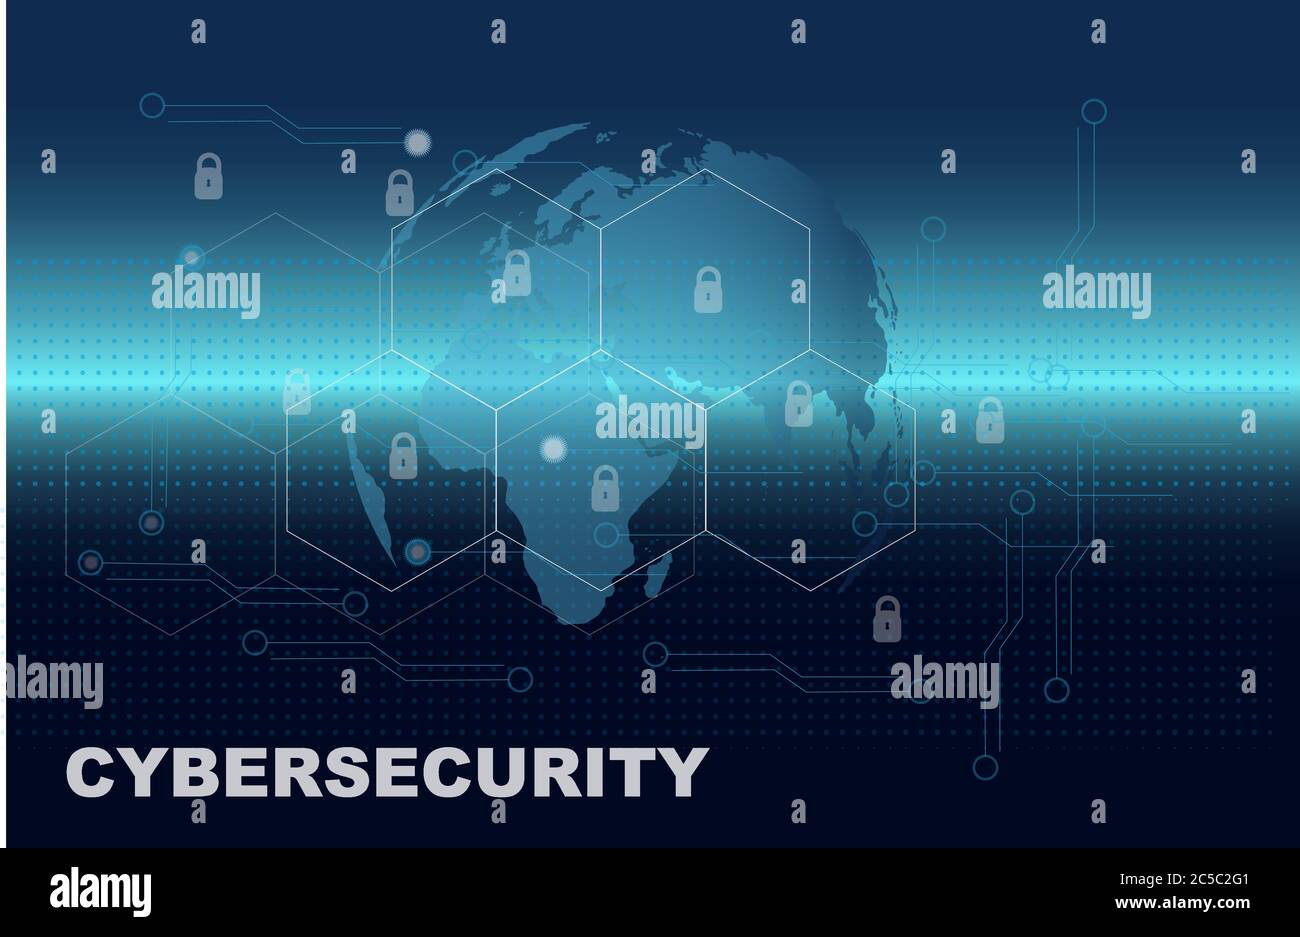 Cyber security concept vector drawing Stock Vector